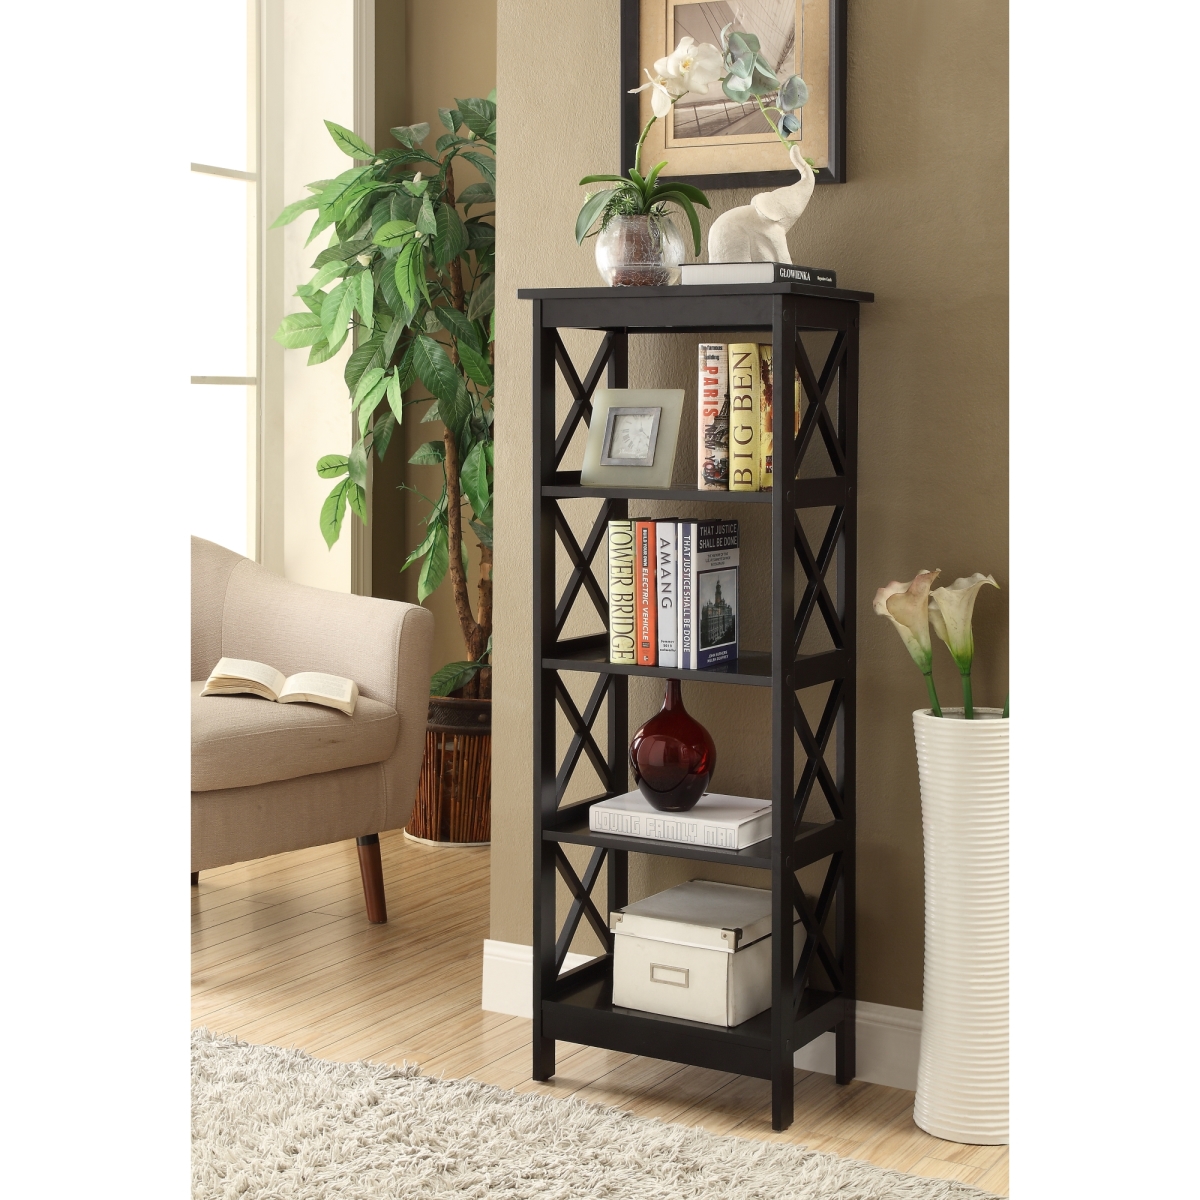 Whif627 X-sided Narrow 4-tier Bookcase, Black